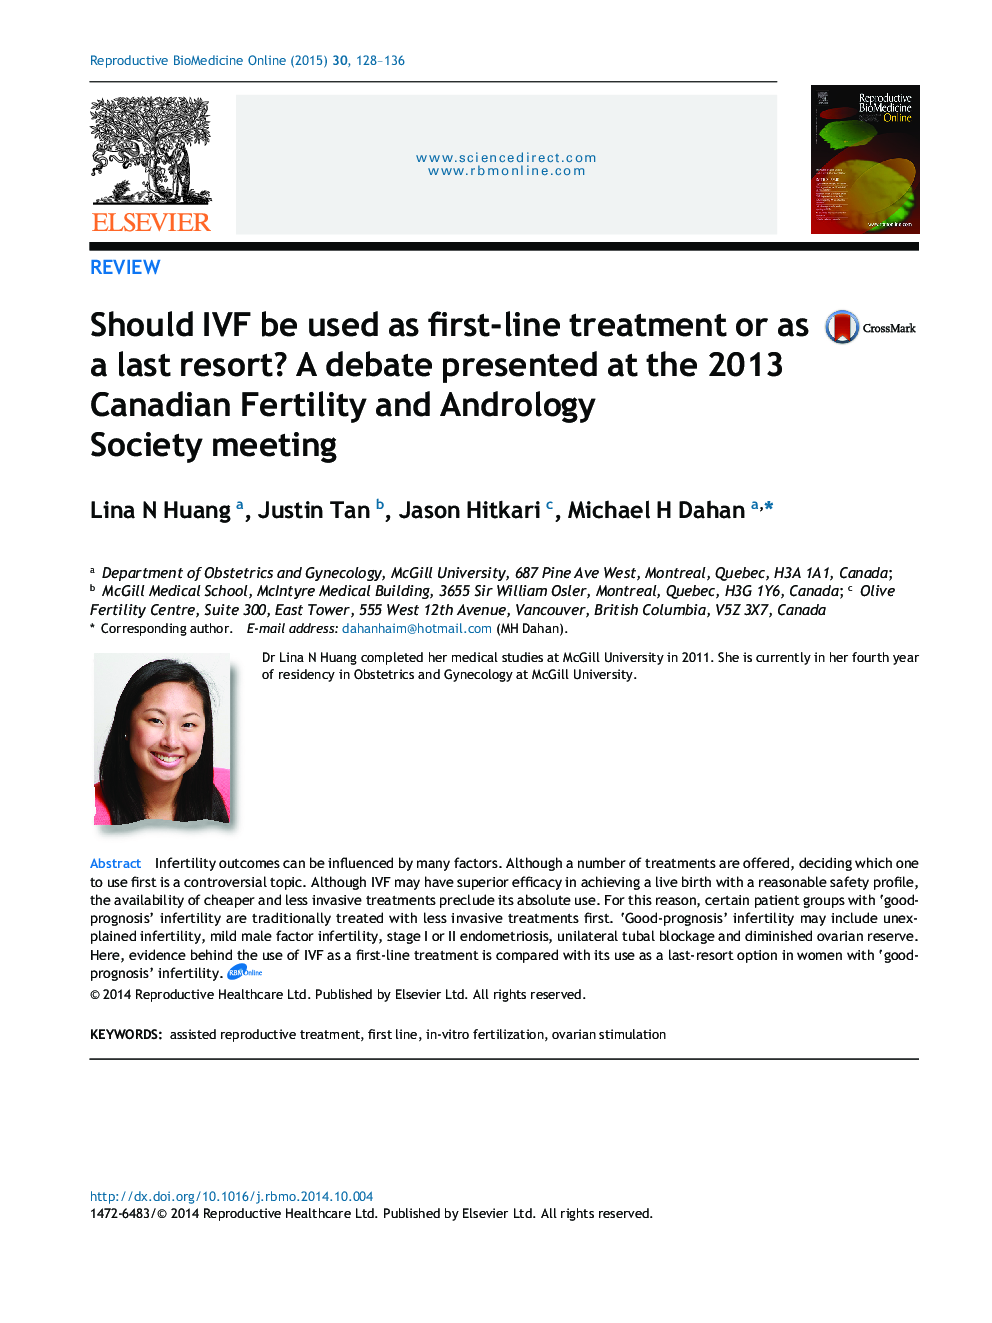 Should IVF be used as first-line treatment or as a last resort? A debate presented at the 2013 Canadian Fertility and Andrology Society meeting